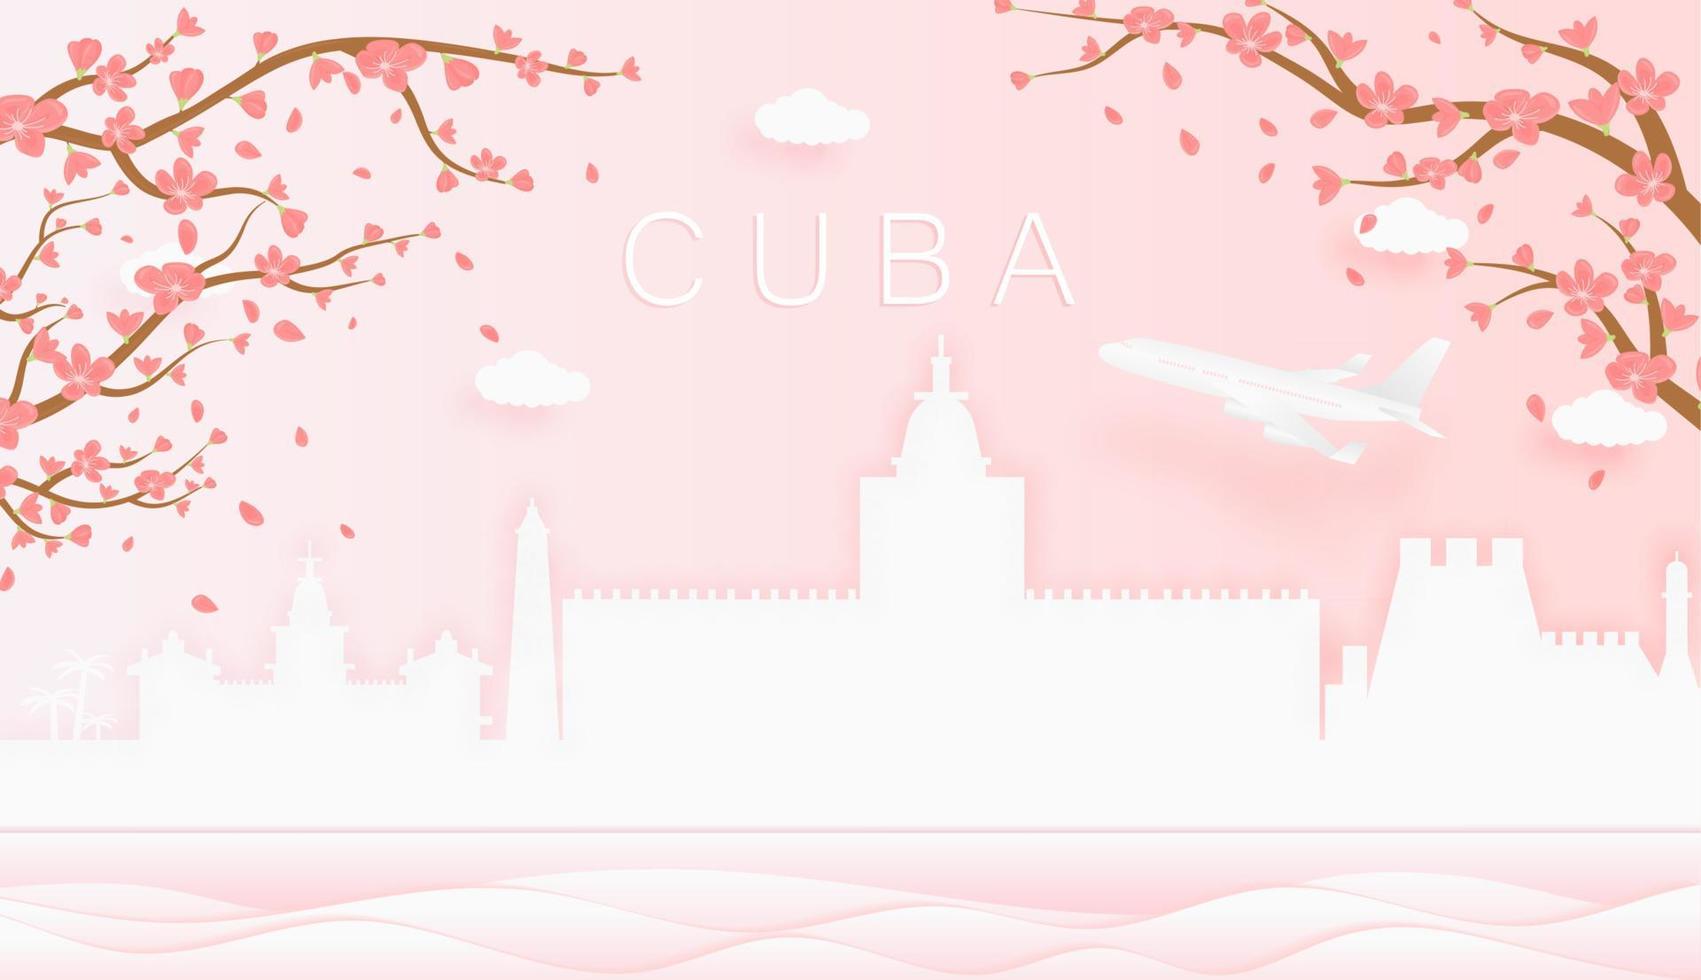 Panorama travel postcard, poster, tour advertising of world famous landmarks of Cuba, spring season with blooming flowers in tree vector